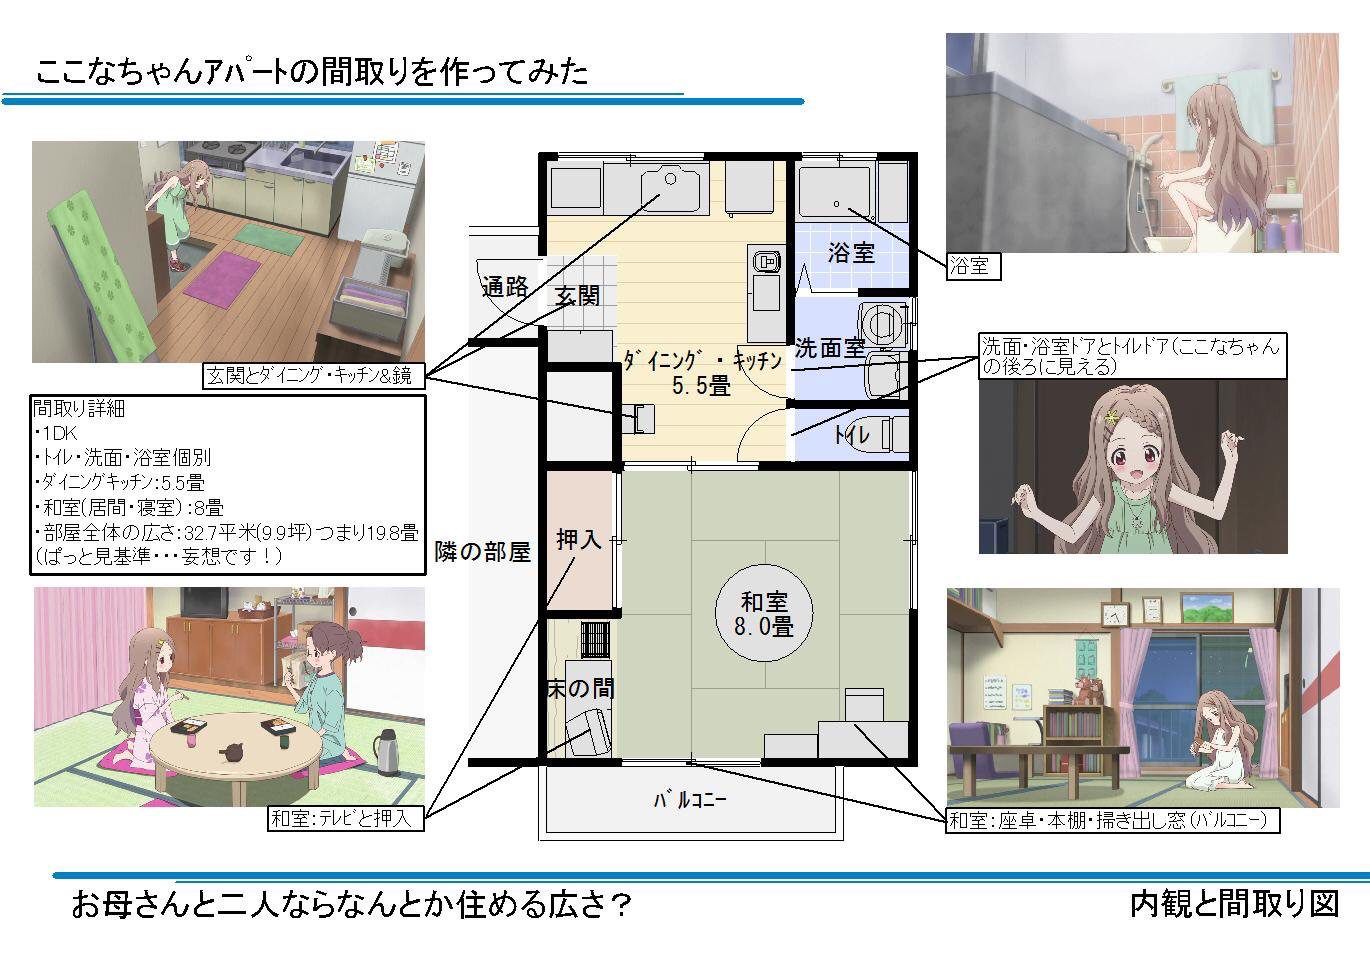 Why are the Susume not playing at her house here????? 1